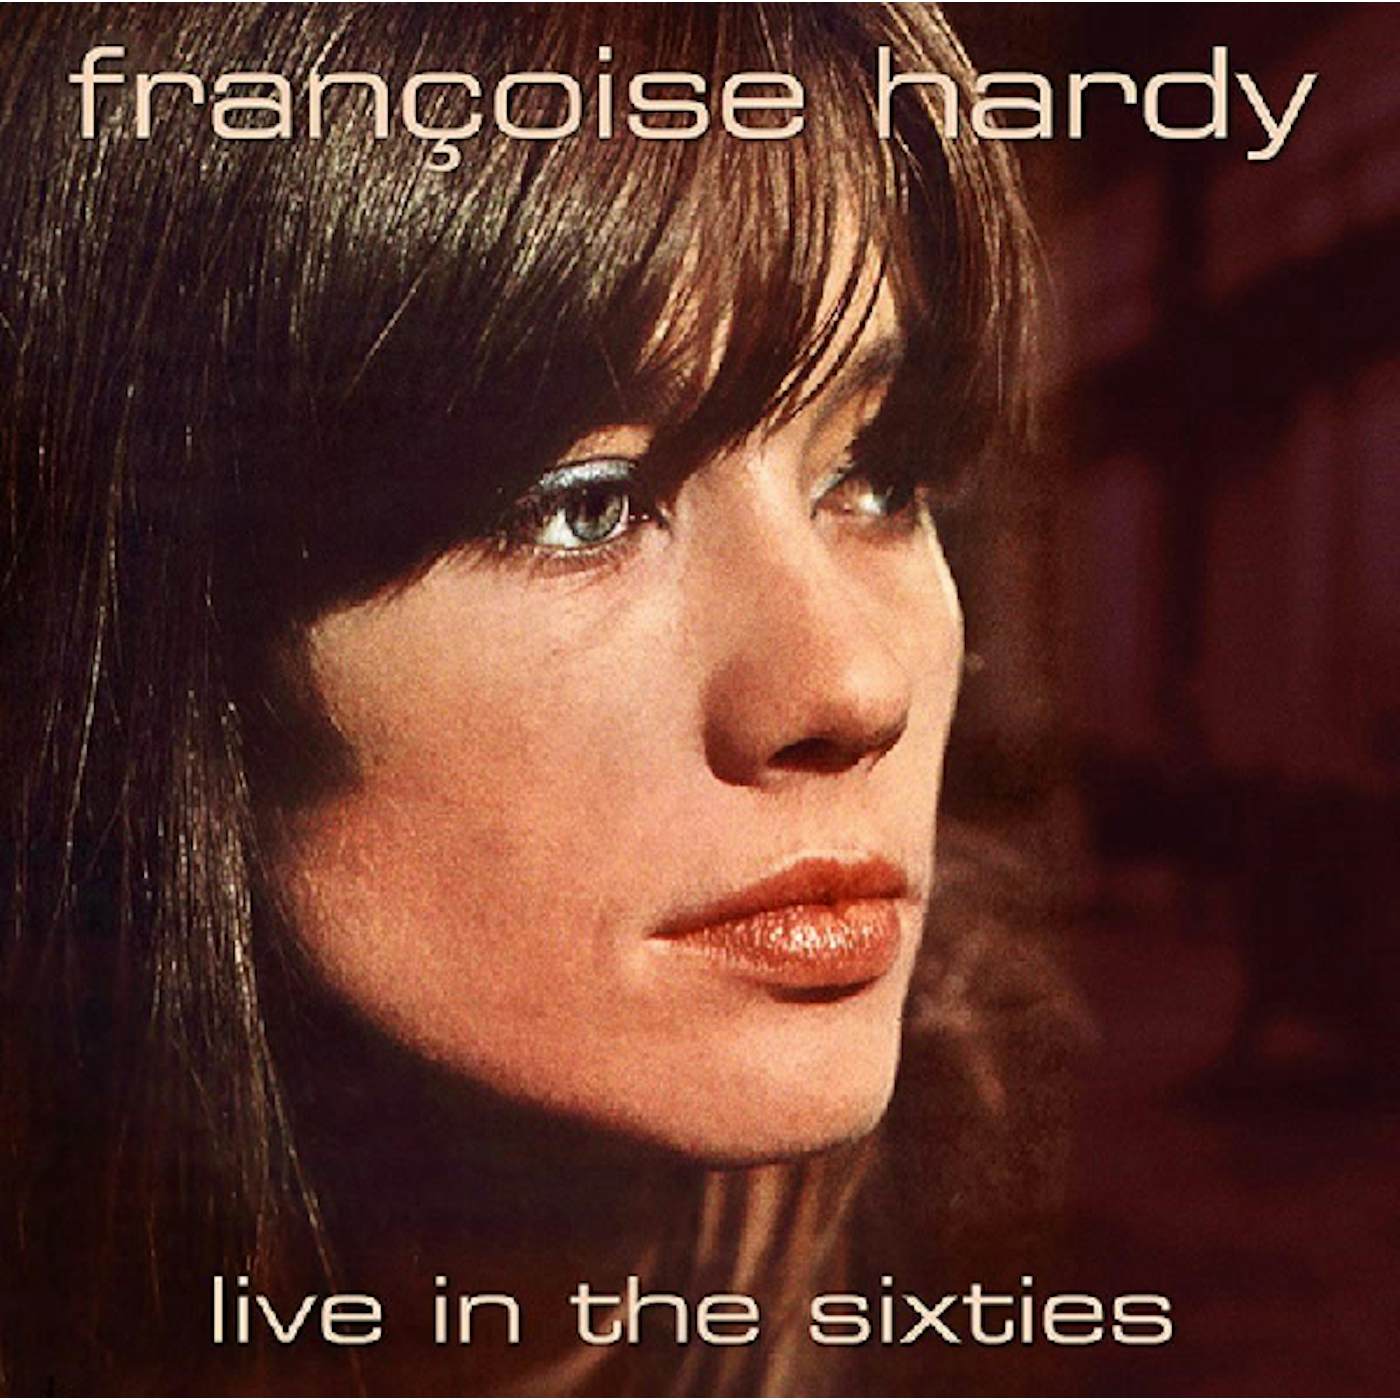 Françoise Hardy LIVE IN THE SIXTIES Vinyl Record